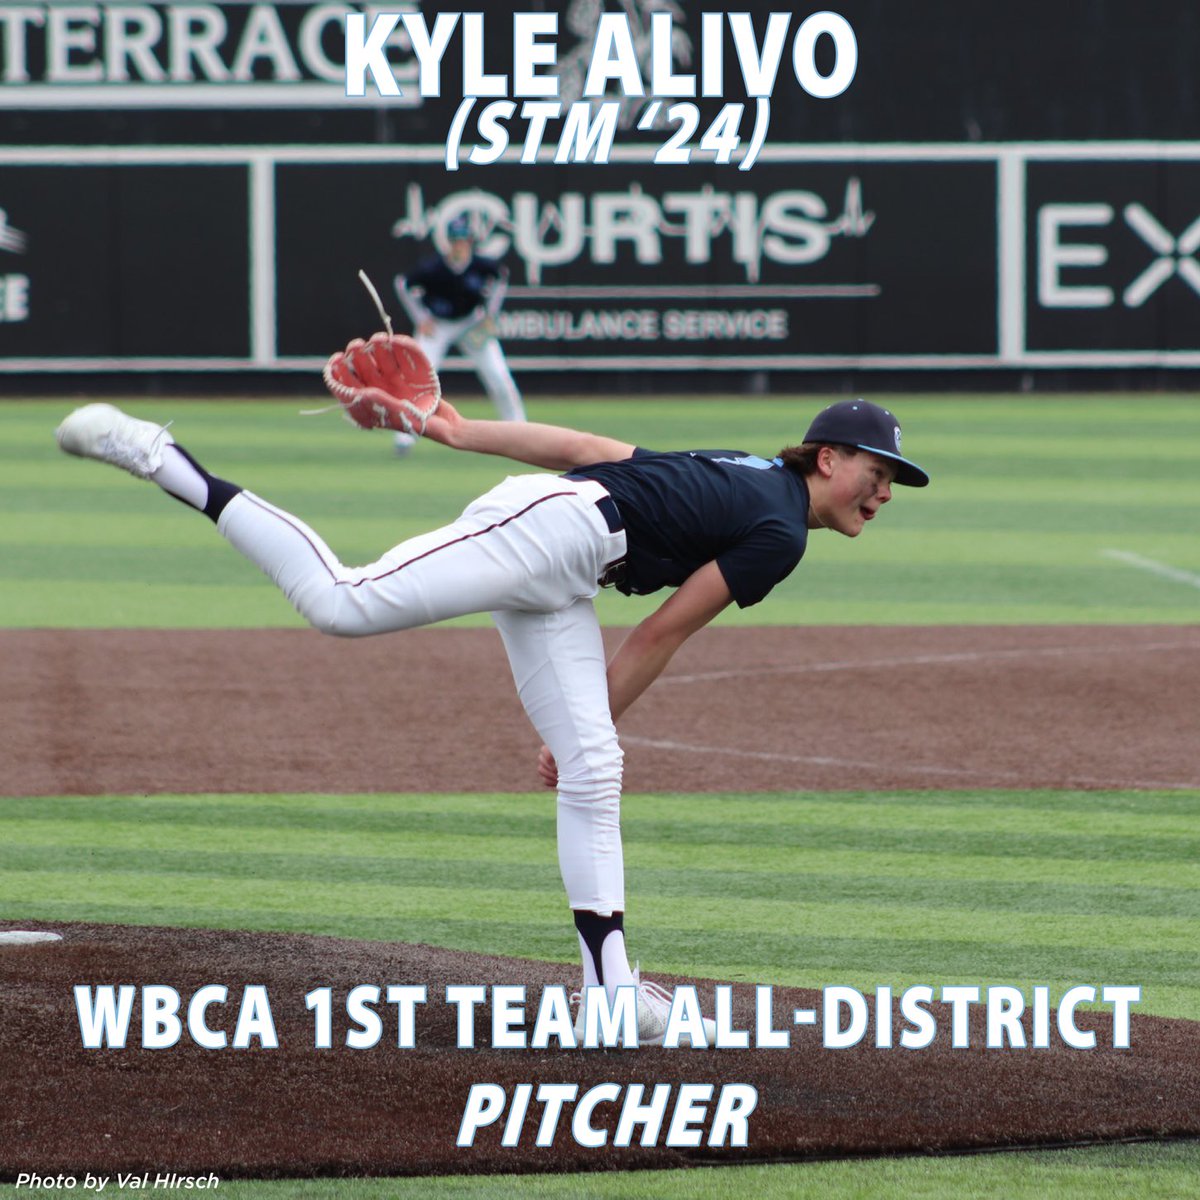 Wisconsin Baseball Coaches Association (WBCA) 1st Team All-District…way to go Kyle!